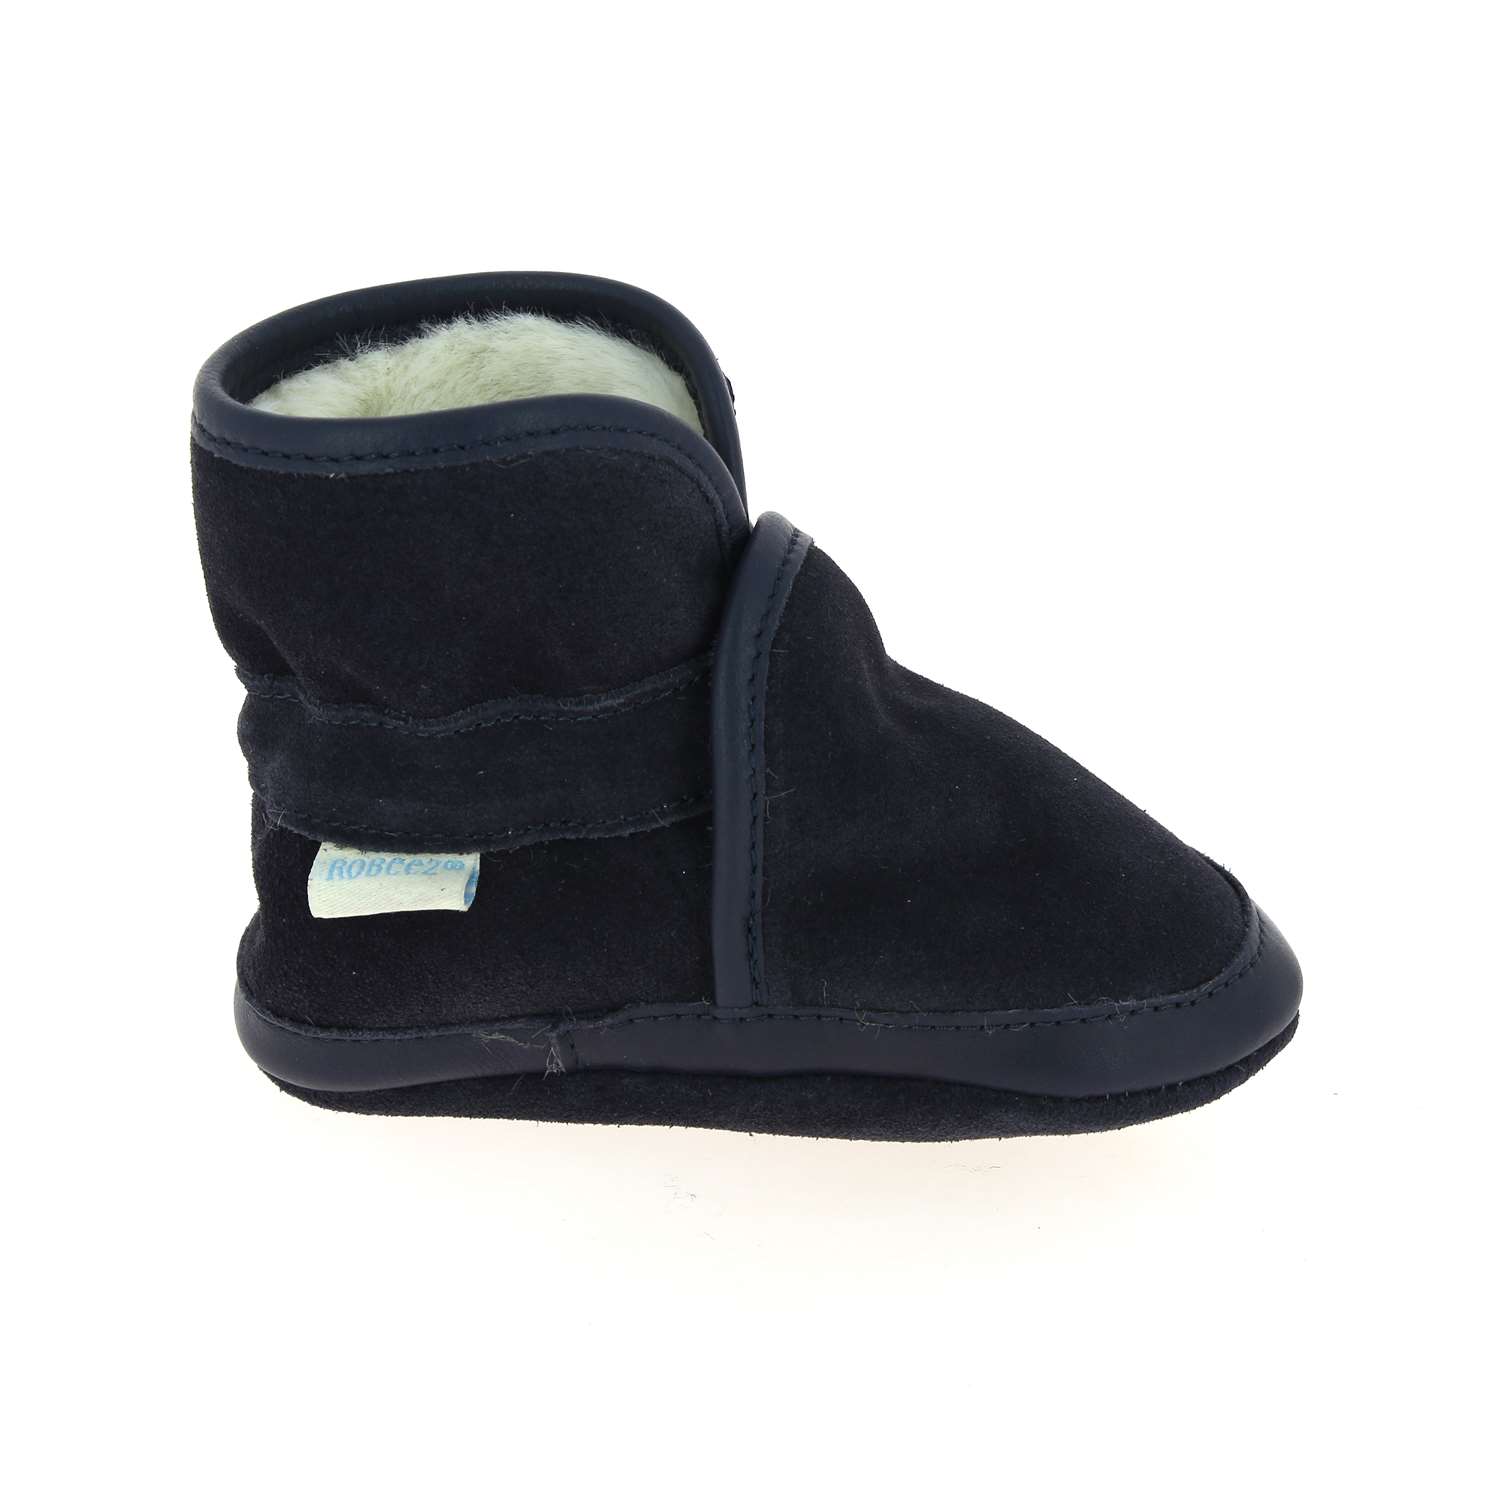 02 - COOL BOOT - ROBEEZ - Chaussons - Nubuck